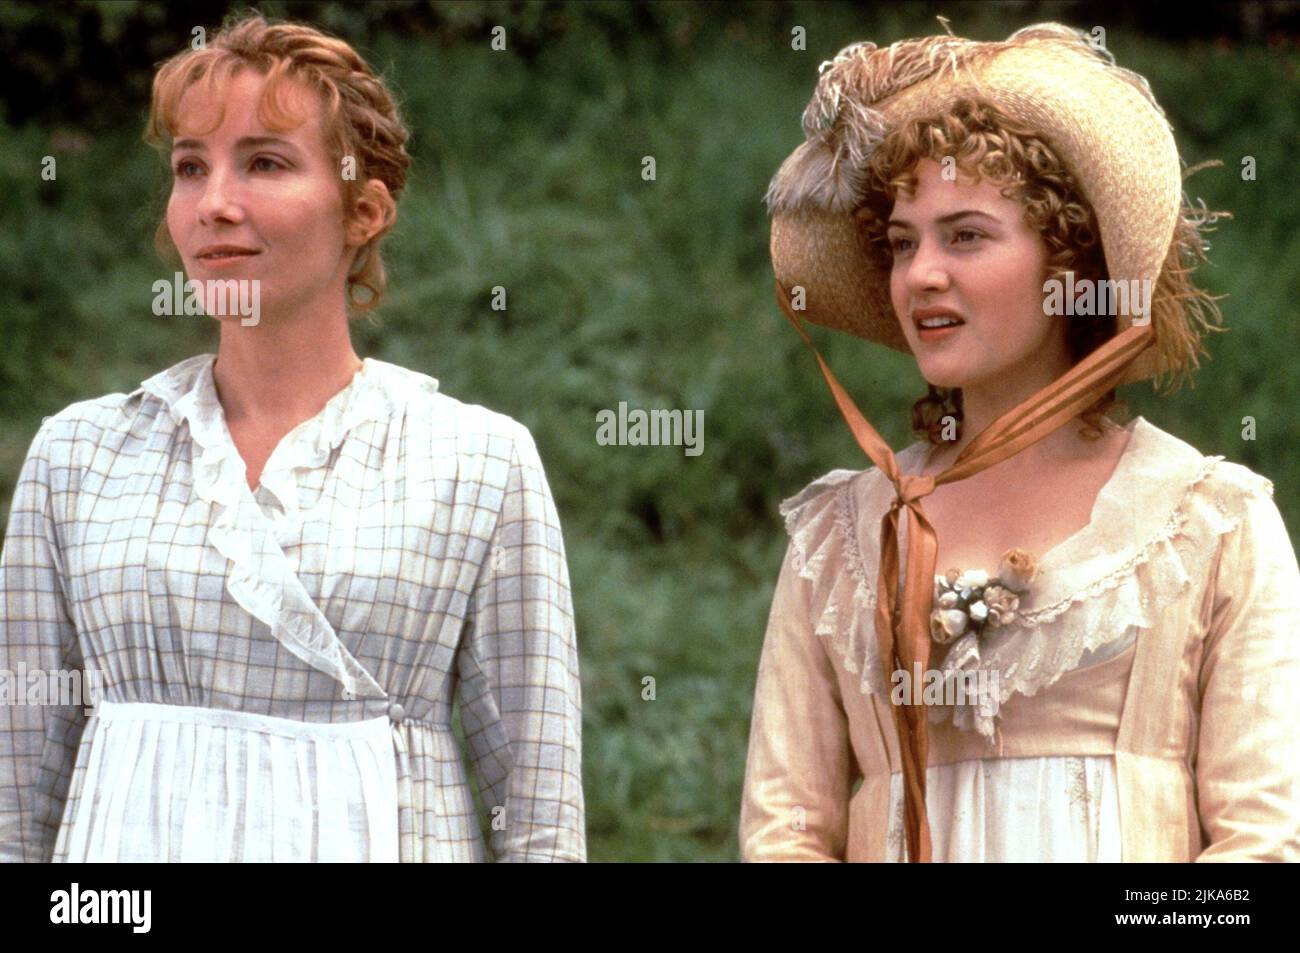 Thompson & Kate Winslet Film: Sense And Sensibility (USA/UK 1995) Characters: Elinor Dashwood & Marianne Dashwood Director: Ang Lee December 1995 **WARNING** This Photograph is for editorial use only and